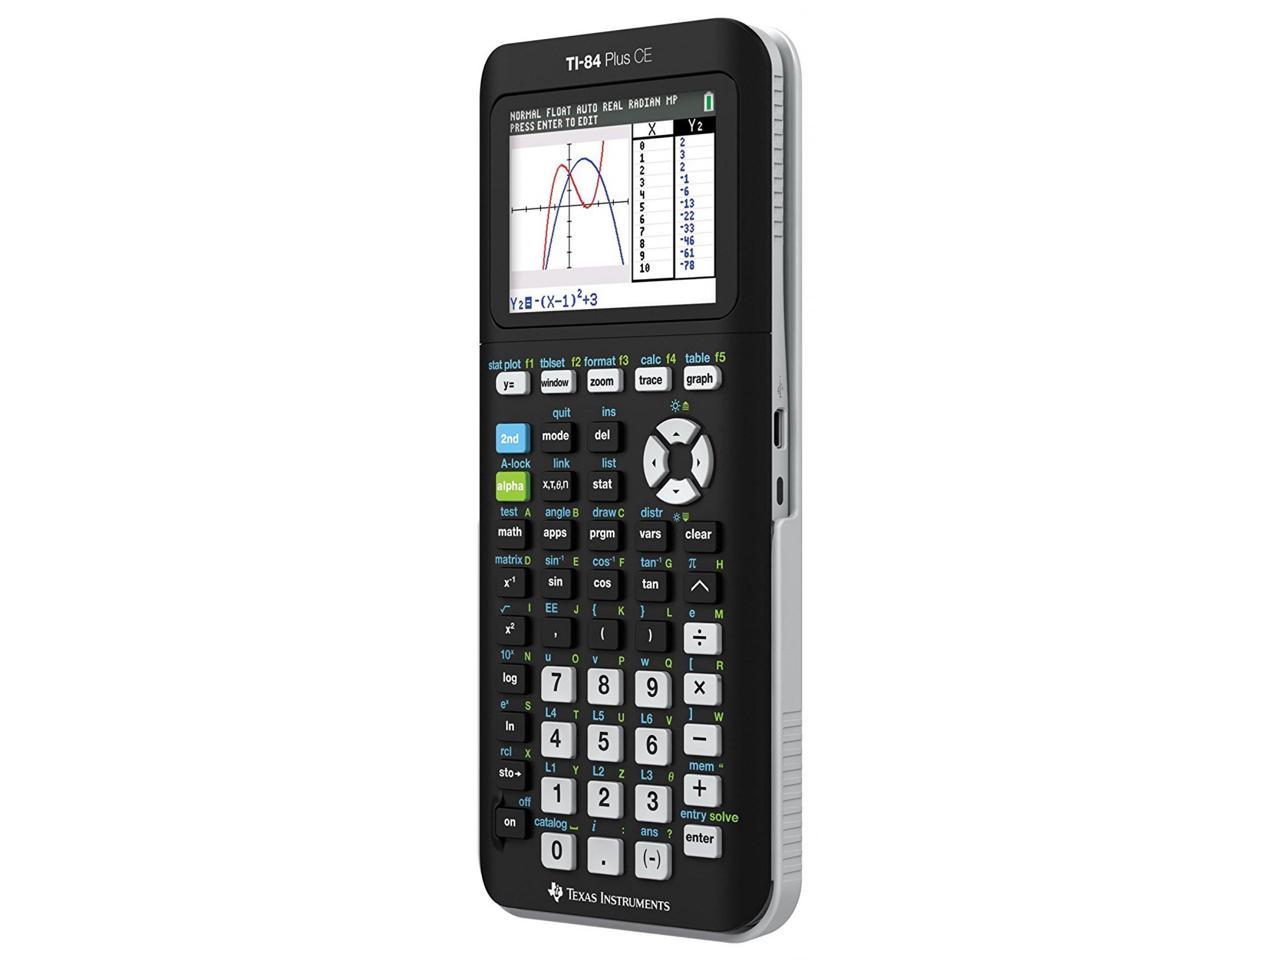 Texas Instruments TI-84 Plus CE Graphing Calculator - Impact Resistant